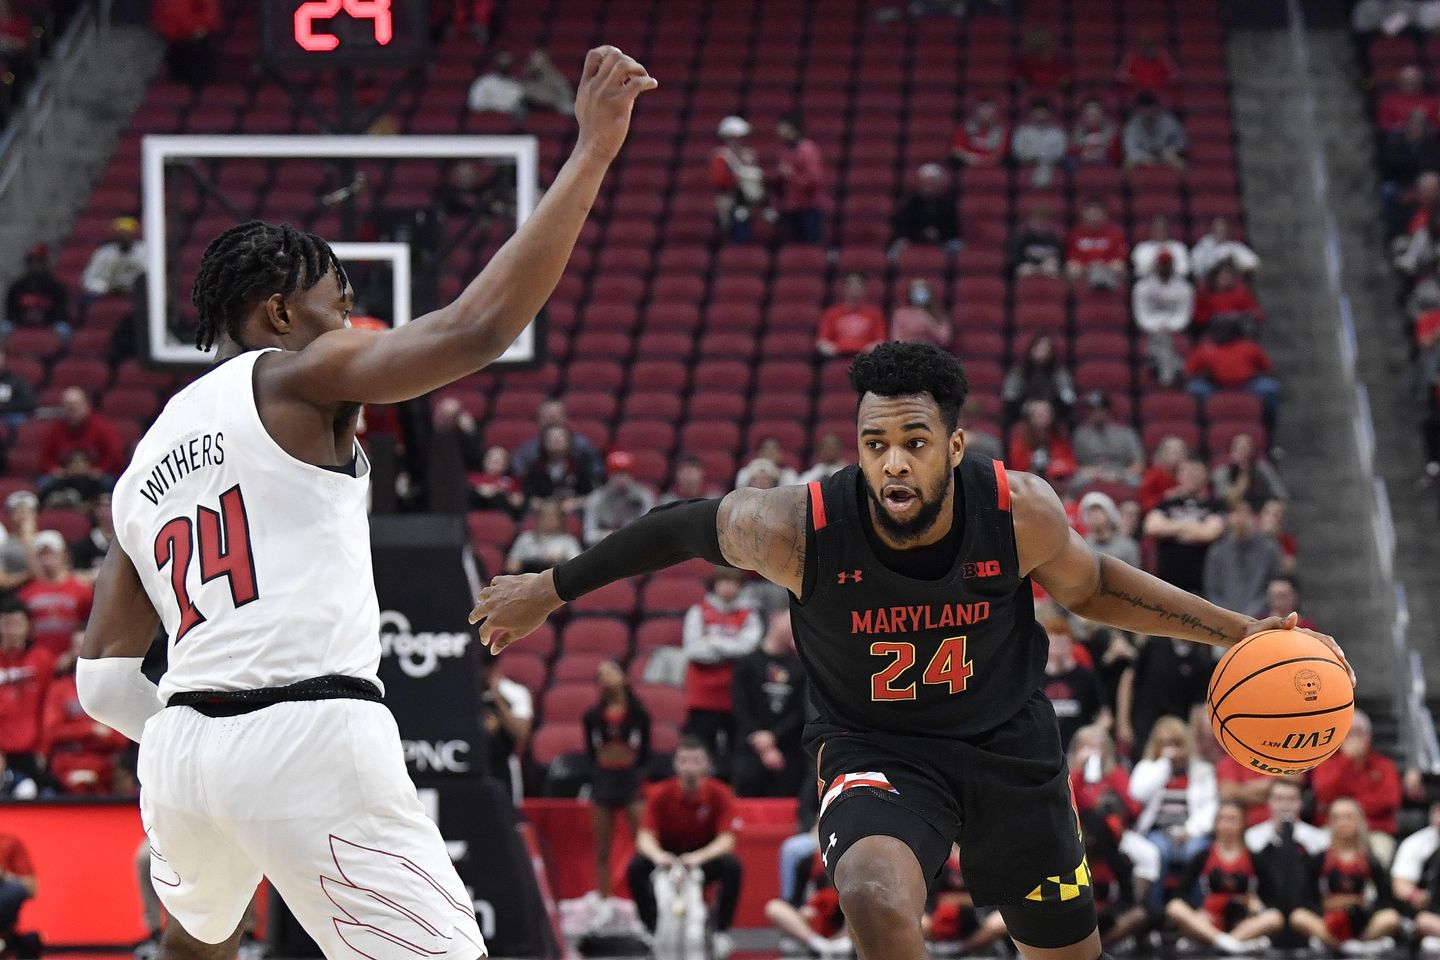 Sports News: Donta Scott scores 18, No. 22 Maryland blows out Louisville 79-54